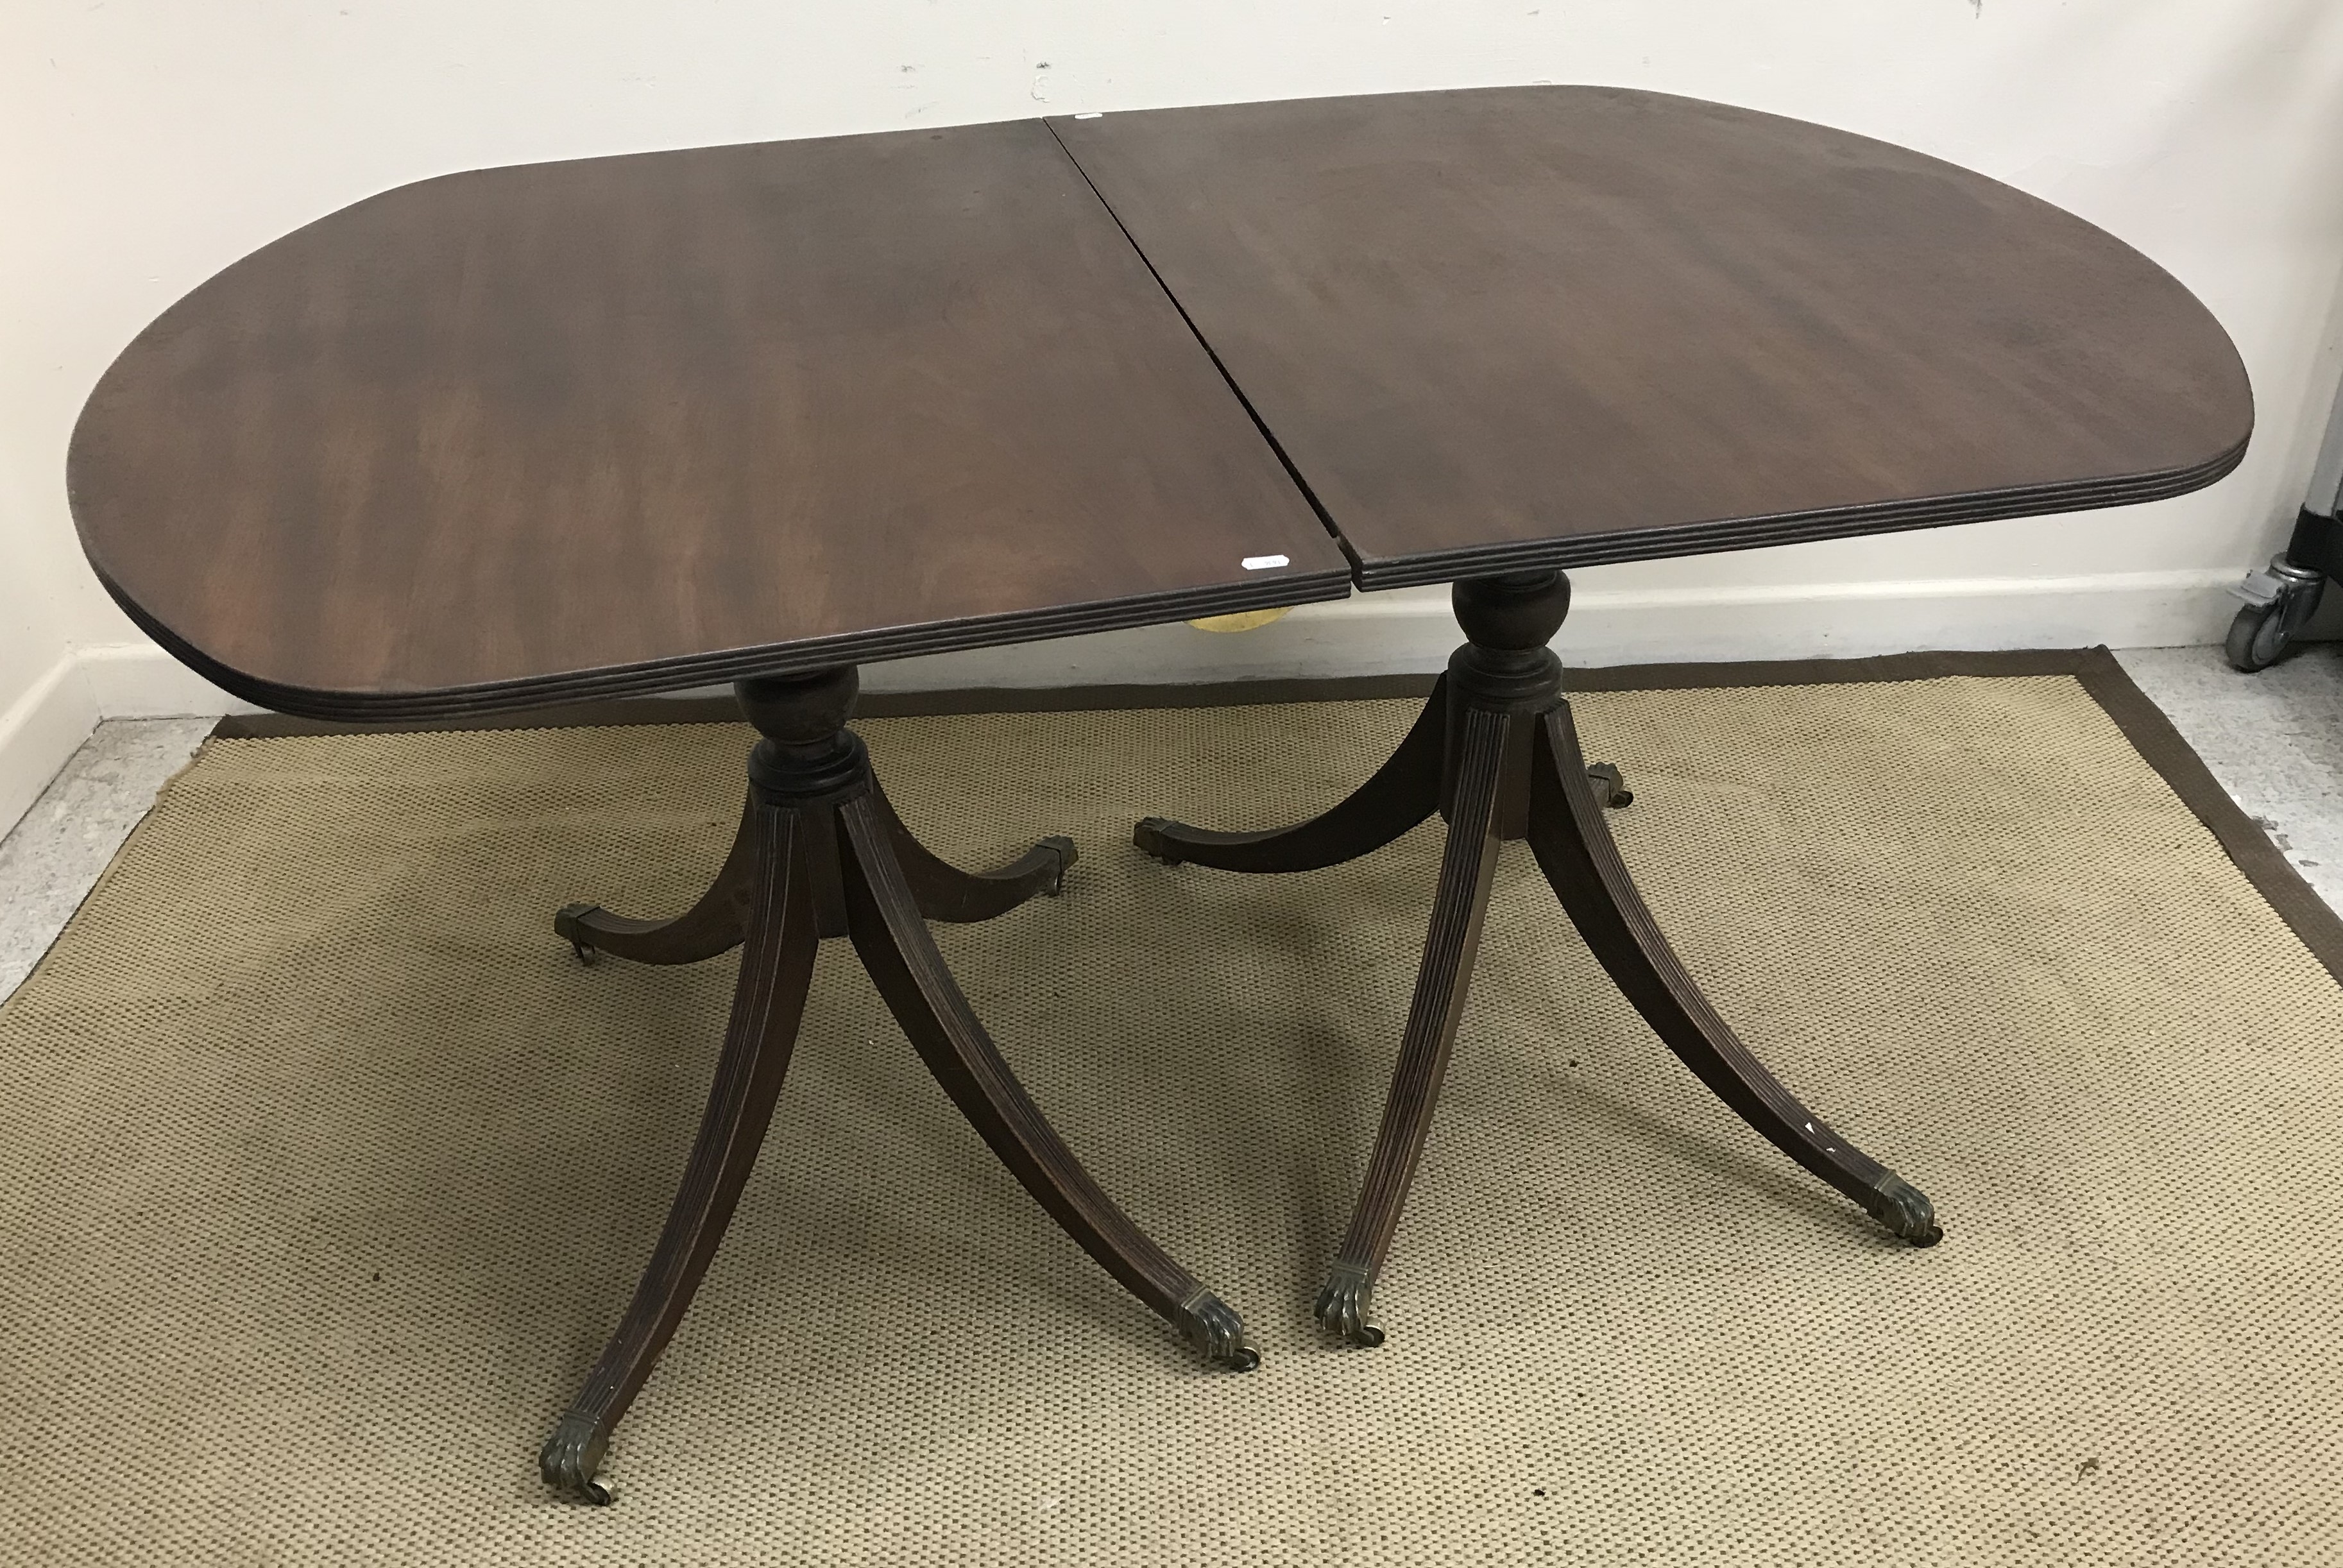 A mahogany D end twin pillar dining table in the George III taste 146 cm long x 97 cm wide x 74 cm